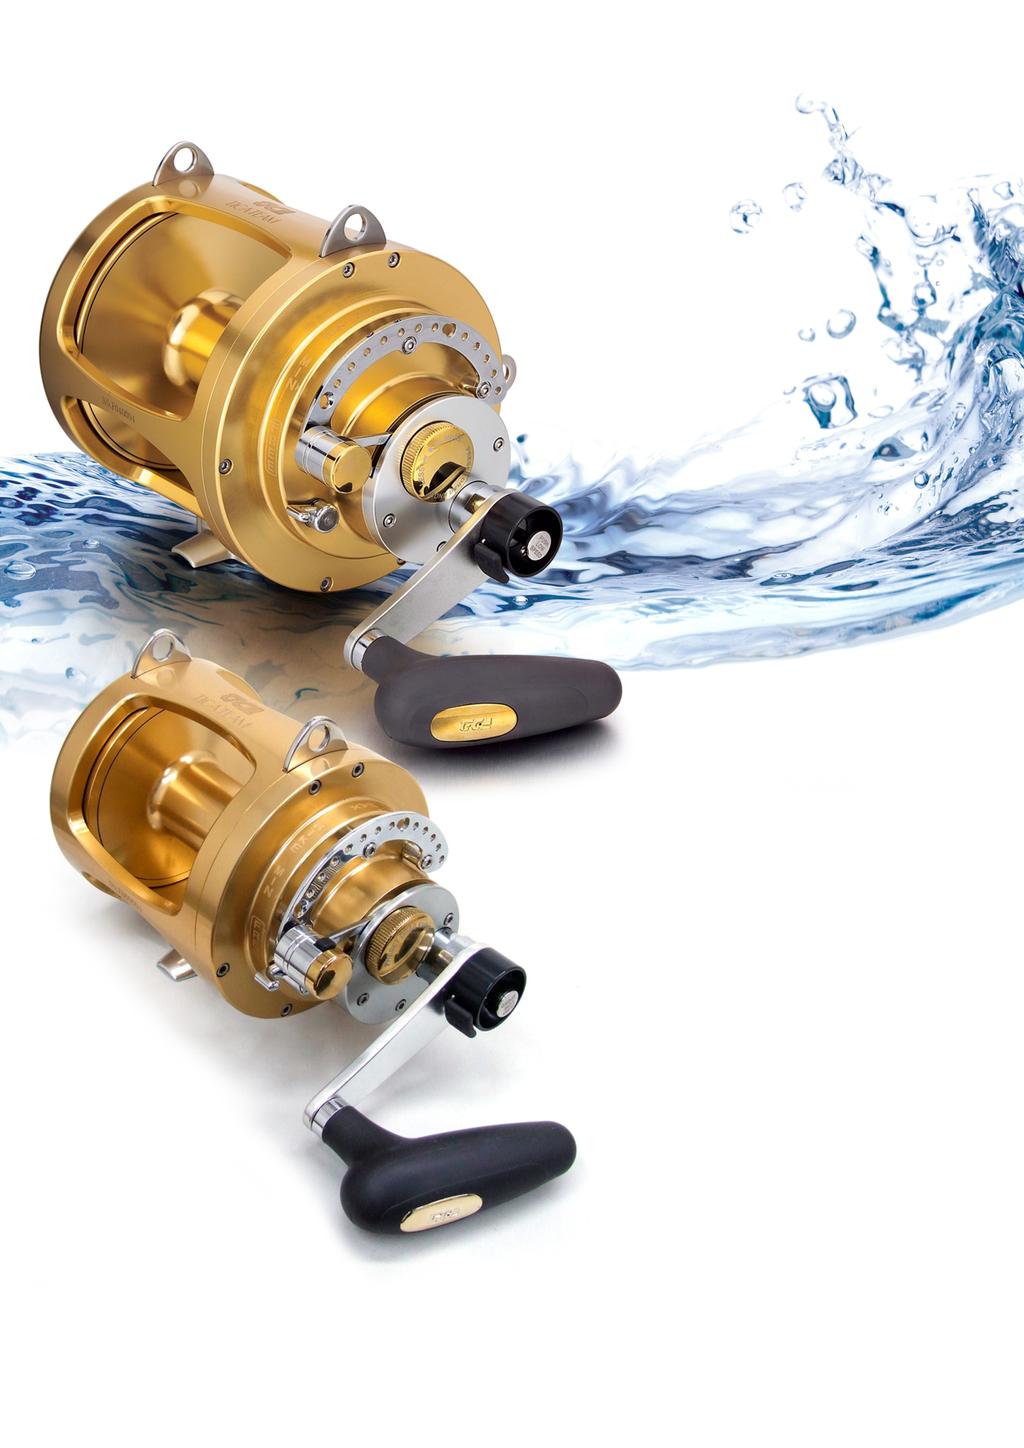 TiCA 2 SPEED GAME S 2 SPEED LEVER DRAG Tica Team 2-speed game reels feature a one-piece frame, the spool and side plate are carved from solid T6061 aircraft aluminium, then gold